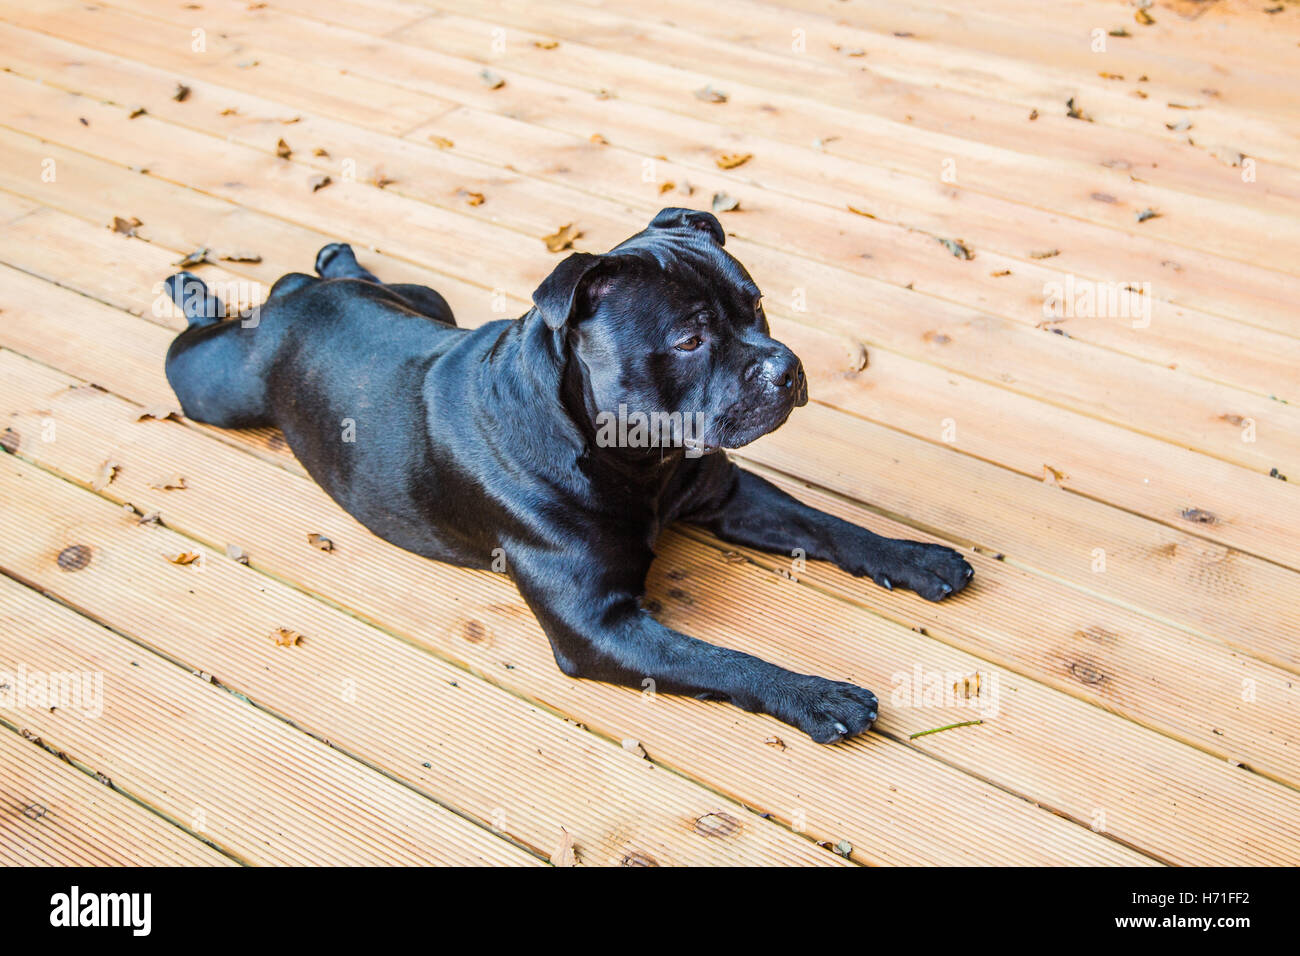 A handsome black Staffordshire Bull Terrier dog lying on wooden decking. his coat is shiny, he is not wearing a collar. Stock Photo